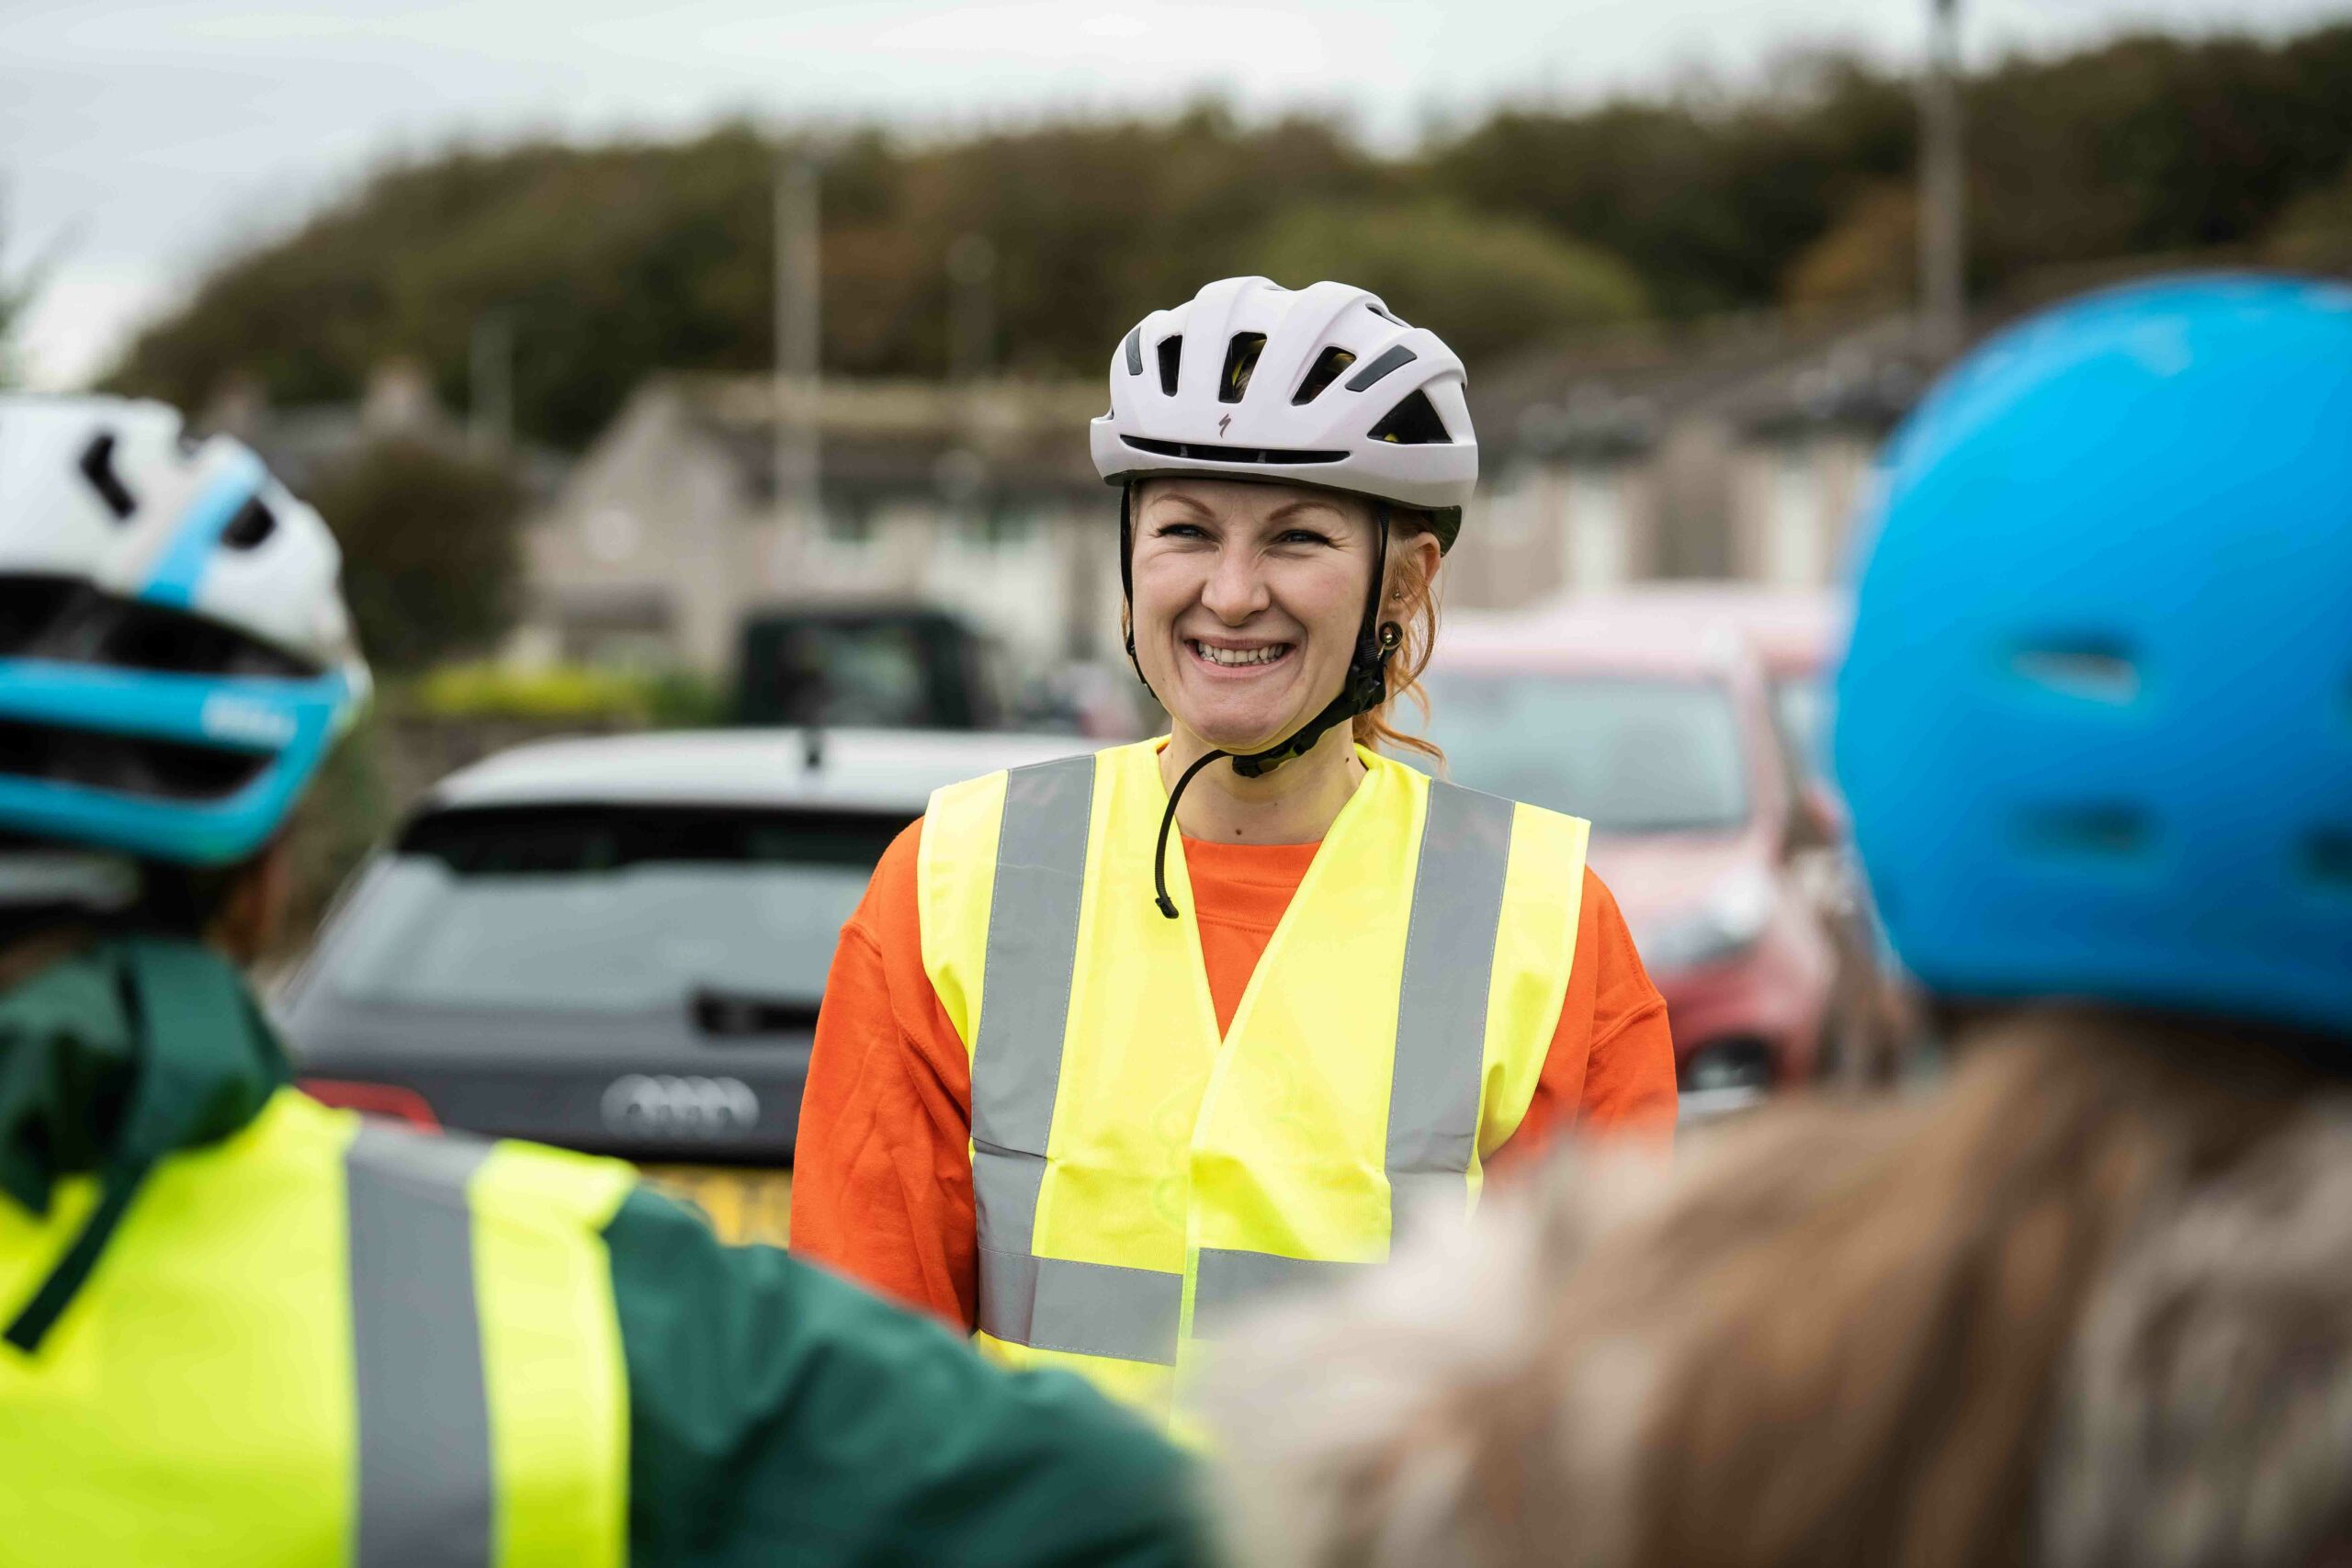 A Bikeability instructor wearing an orange jumper and high vis vest faces the camera smiling. In the foreground are the backs of two children's heads which the camera is looking through their shoulders. .